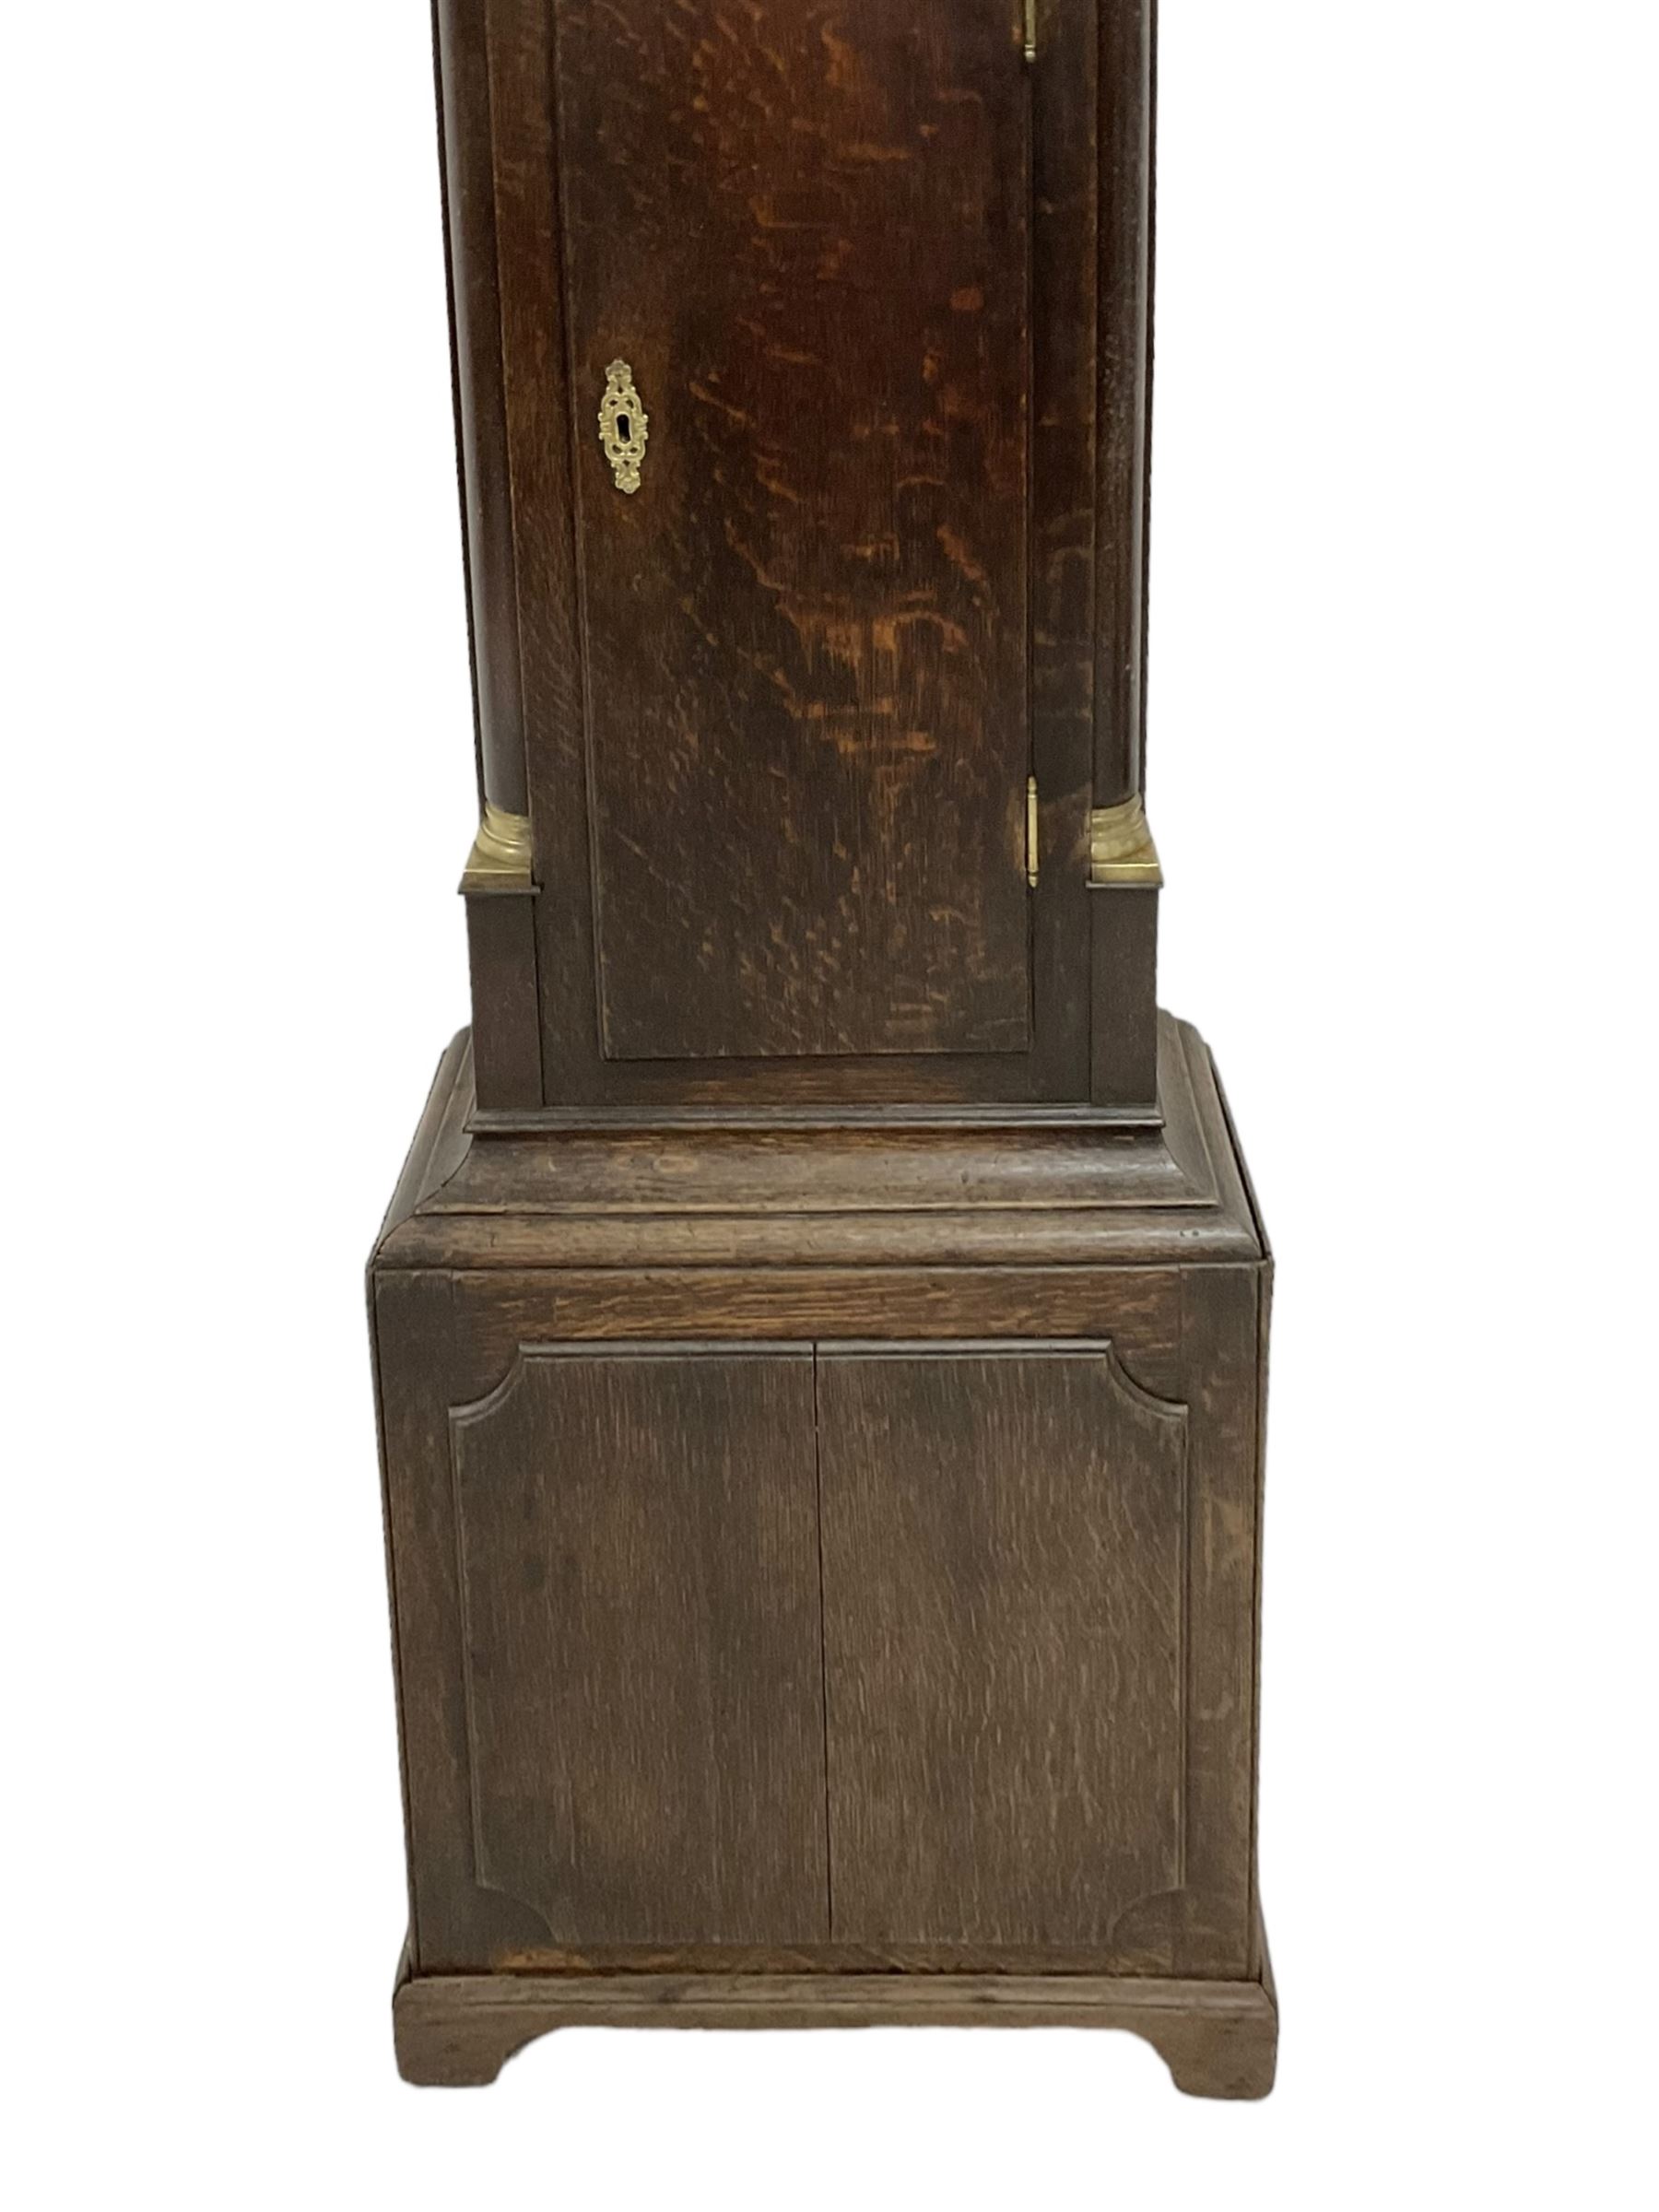 Thomas Lister of Halifax - Late 18th century oak cased 8-day longcase clock with a swans neck pedime - Image 4 of 6